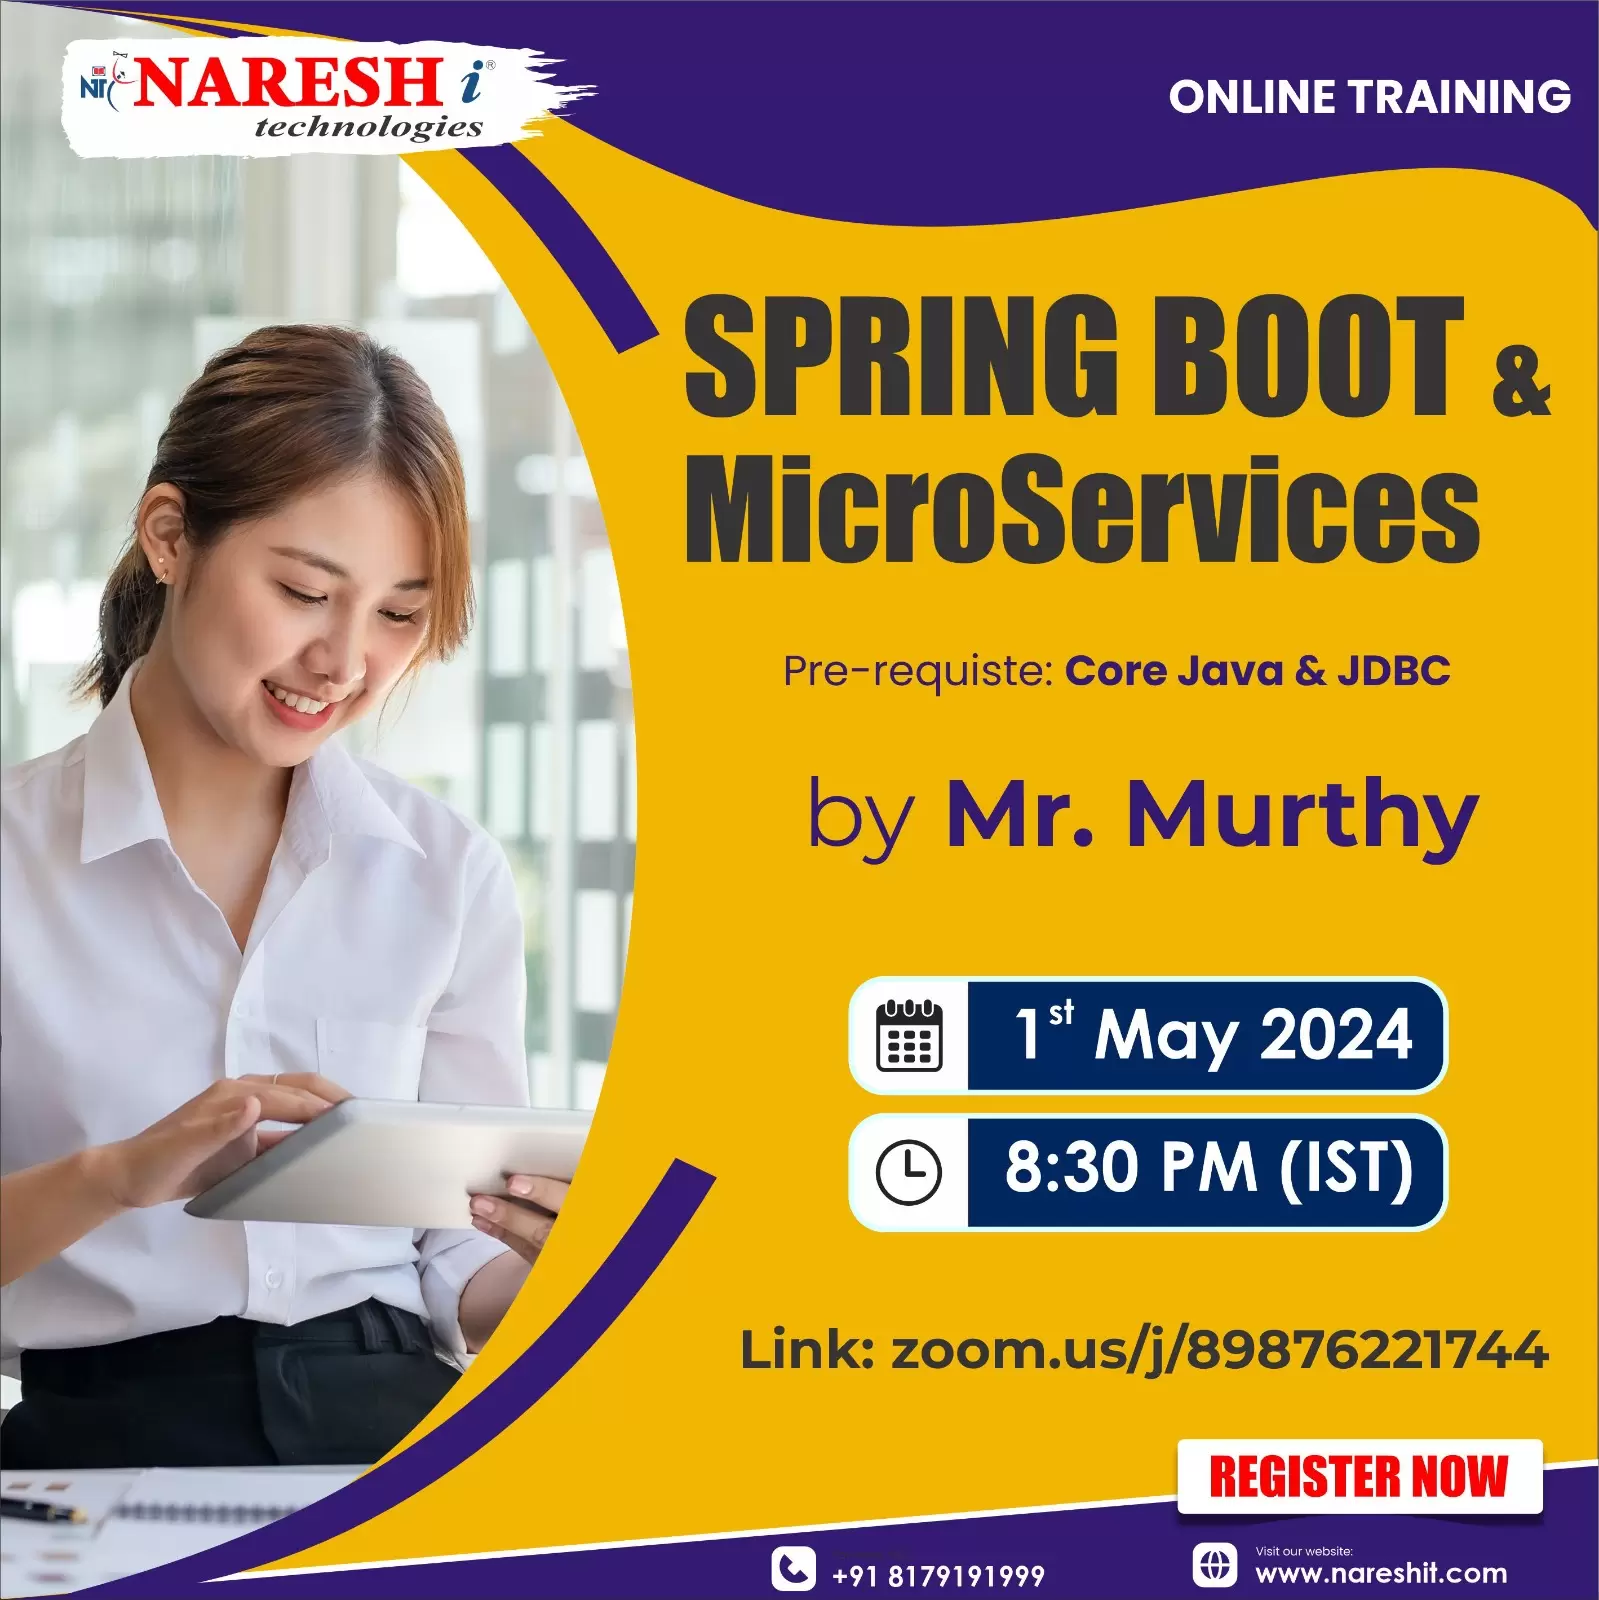 Springboot & Microservices Online Training in NareshIT